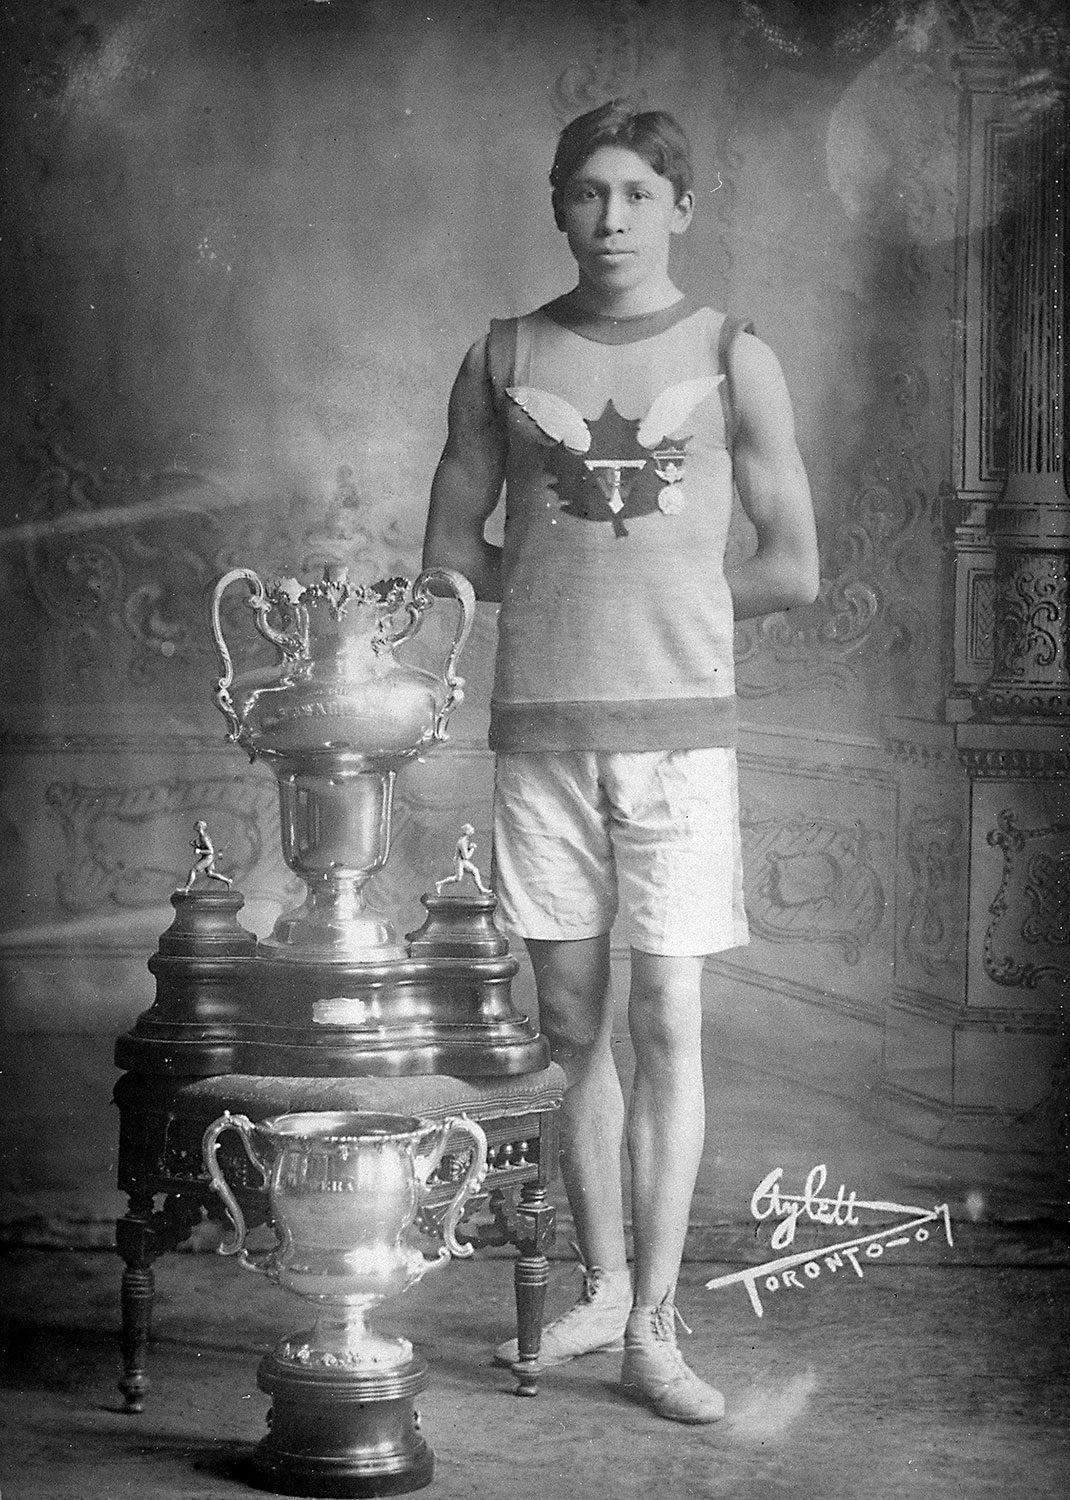 Tom Longboat with running trophies (April 22, 1907). Photo courtesy of Library and Archives Canada.